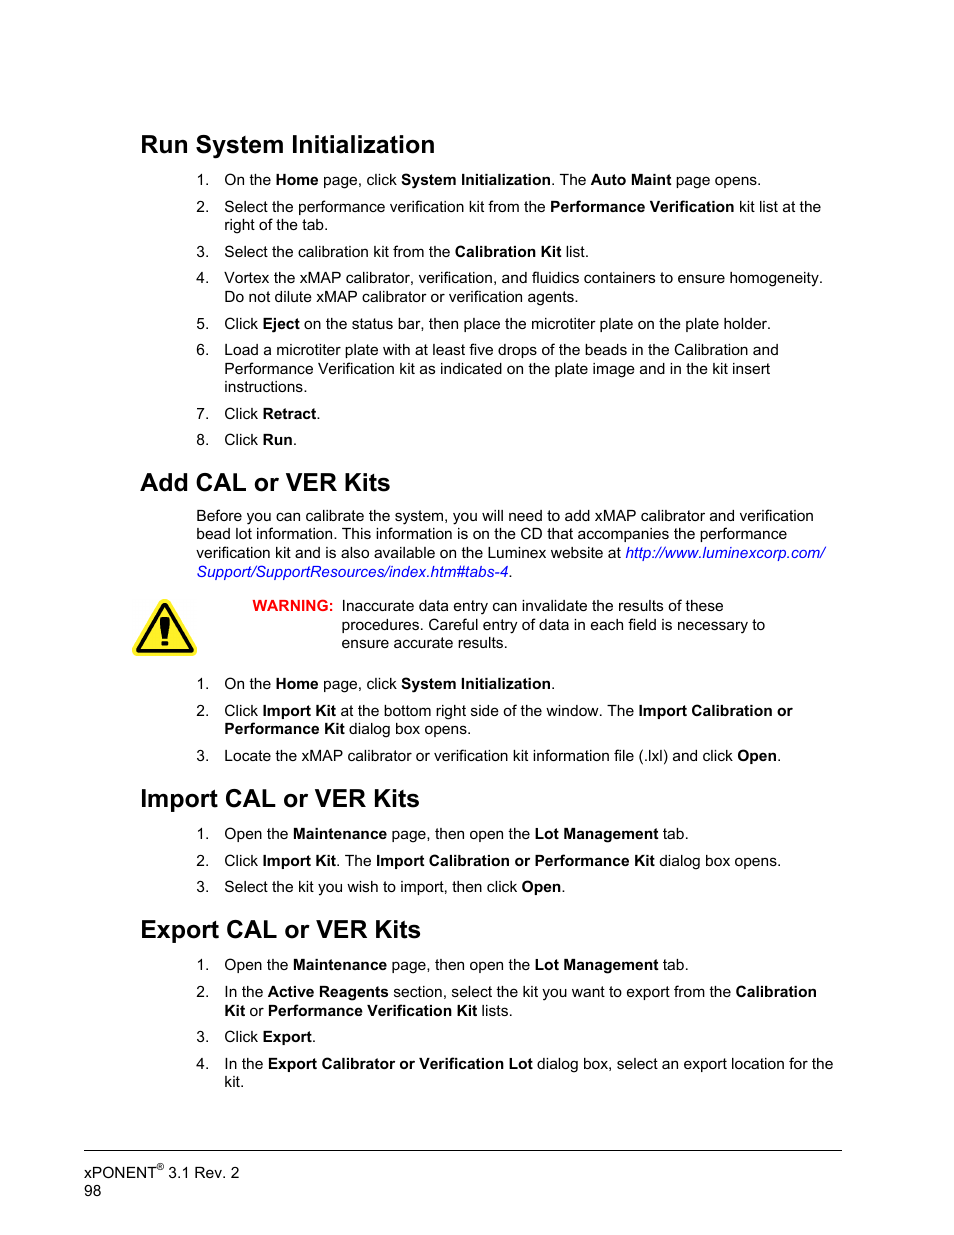 Run system initialization, Add cal or ver kits, Import cal or ver kits | Export cal or ver kits | Luminex xPONENT 3.1 Rev 2 User Manual | Page 111 / 145